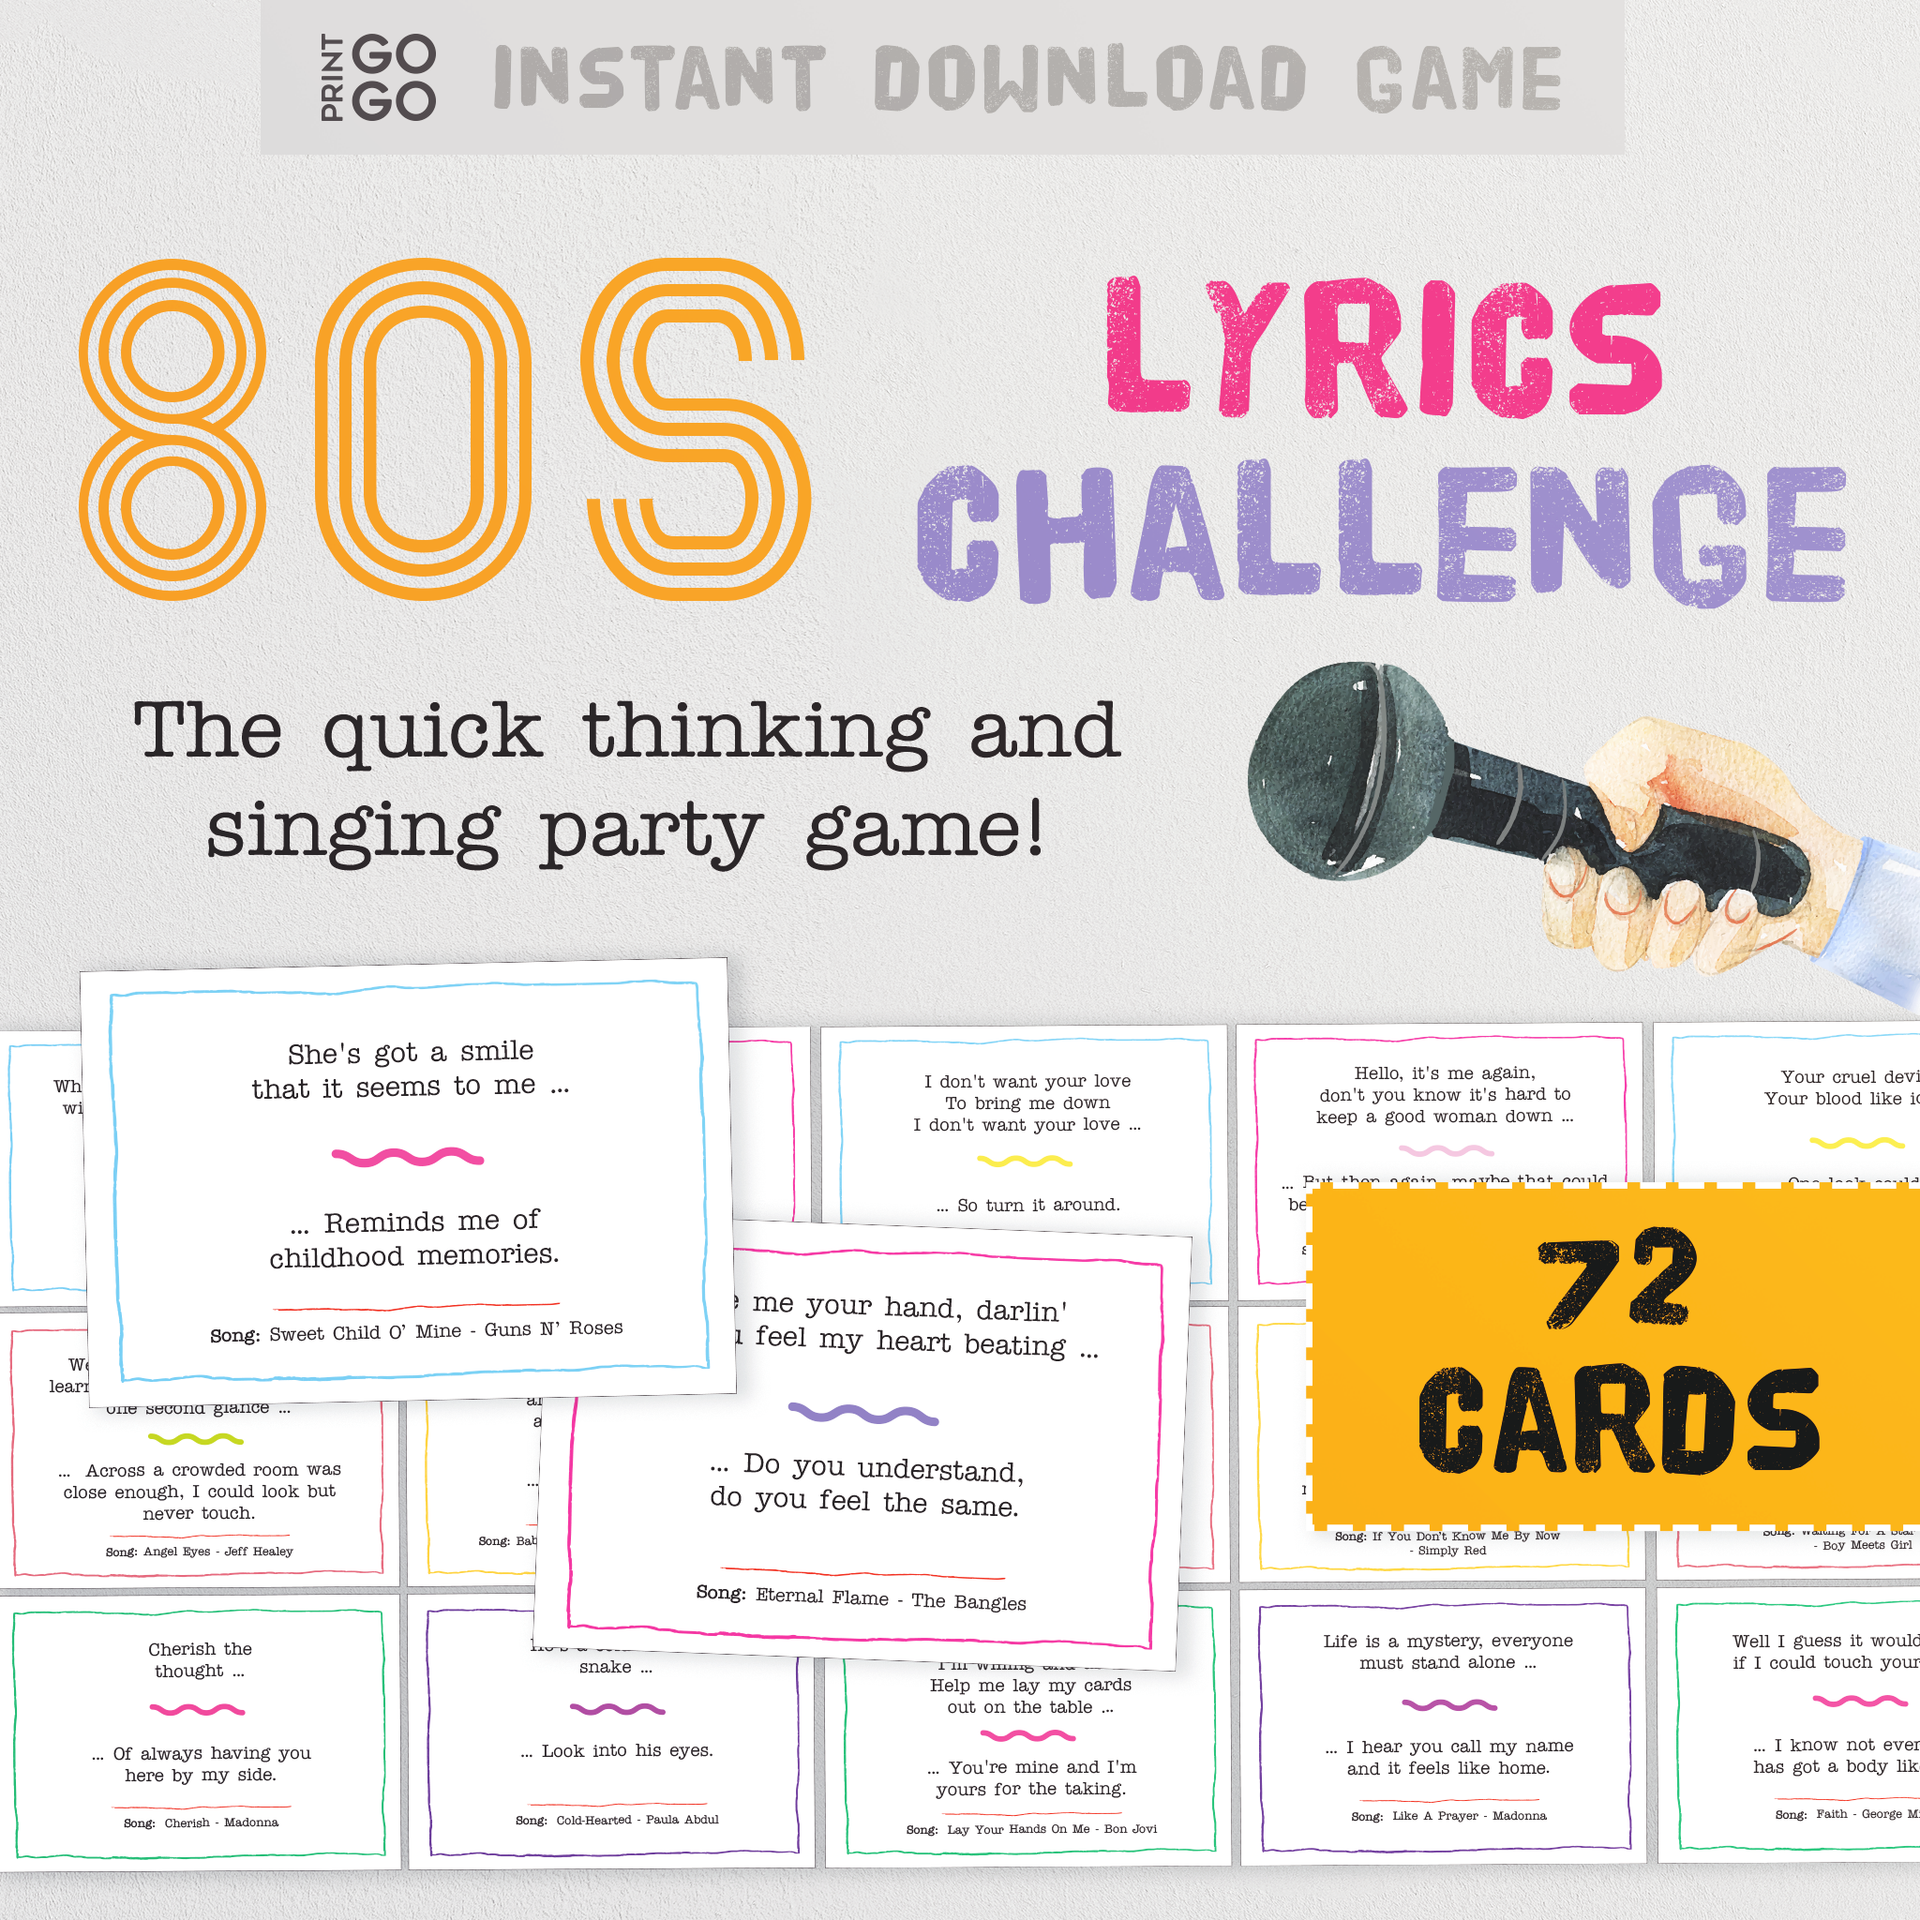 Love Songs Lyrics Challenge Game - The Quick Thinking and Singing Family  Party Game | Valentines Finish the Lyric Game | Musical Group Games